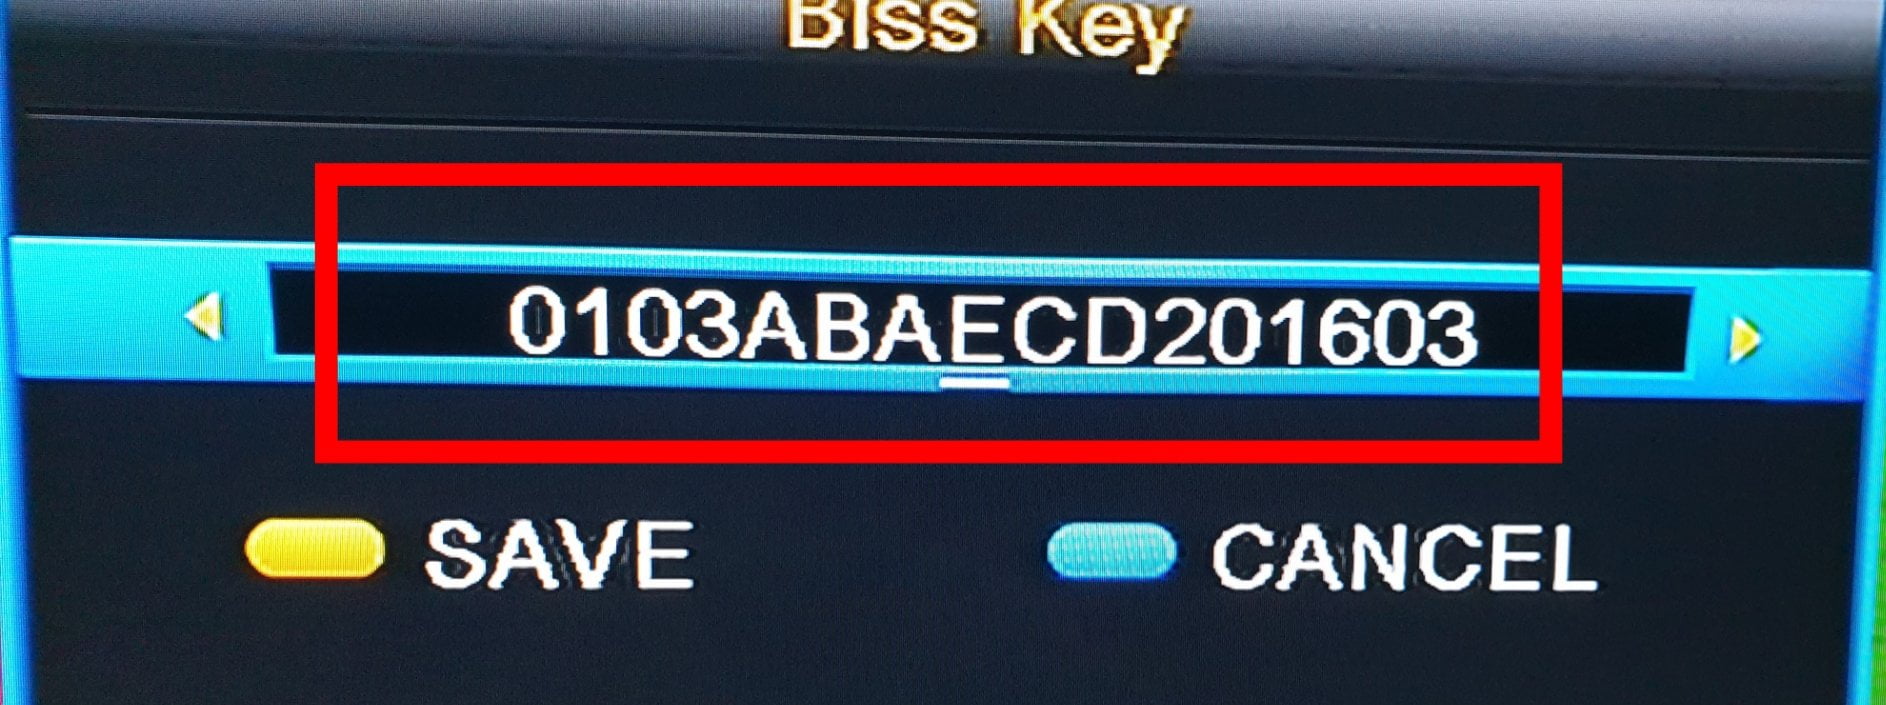 how to use biss key